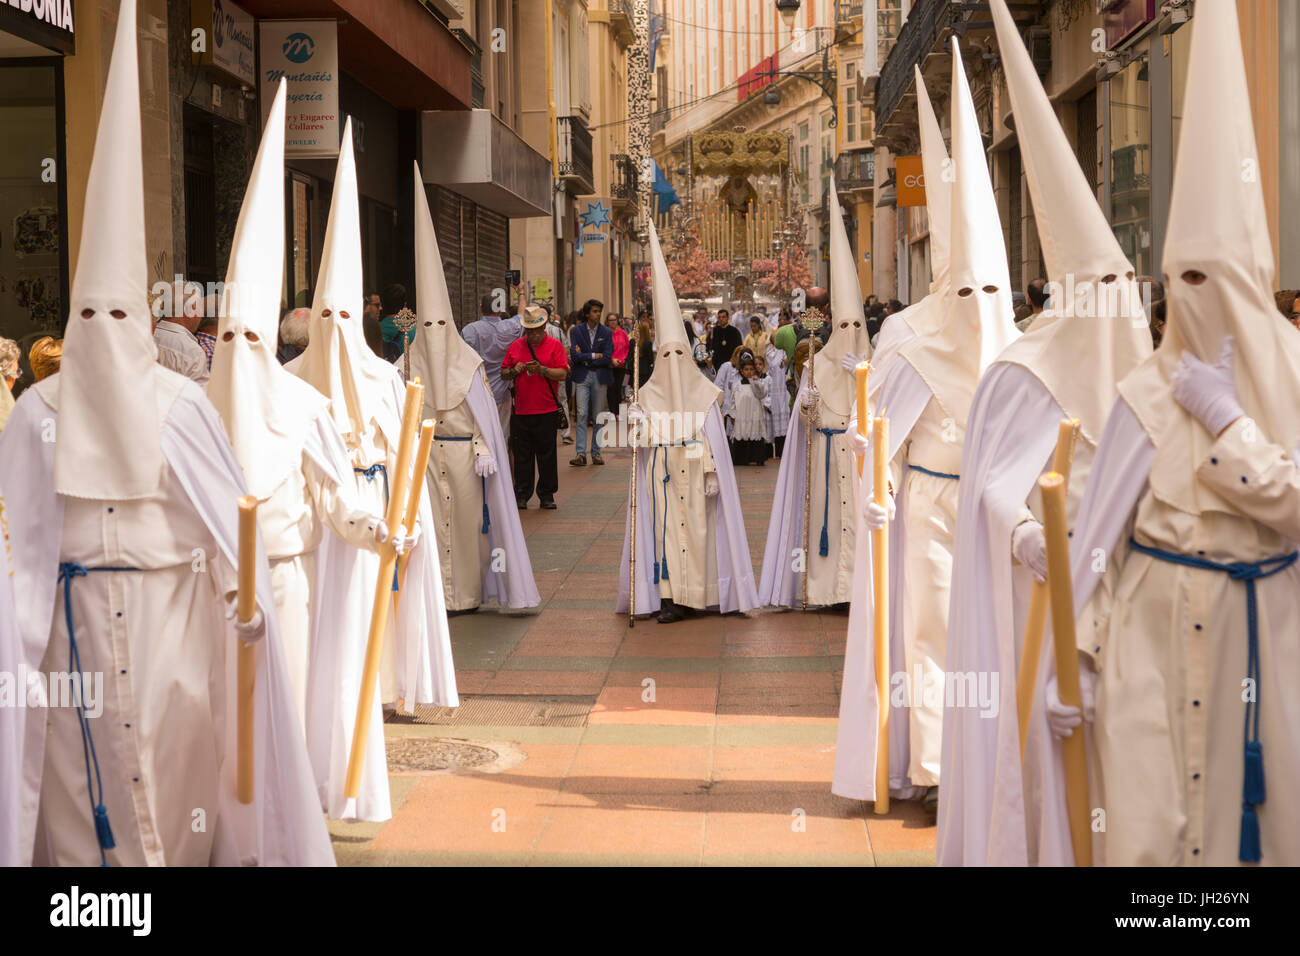 Locals taking part in the Resurrection Parade on Easter Sunday, Malaga, Costa del Sol, Andalusia, Spain, Europe Stock Photo